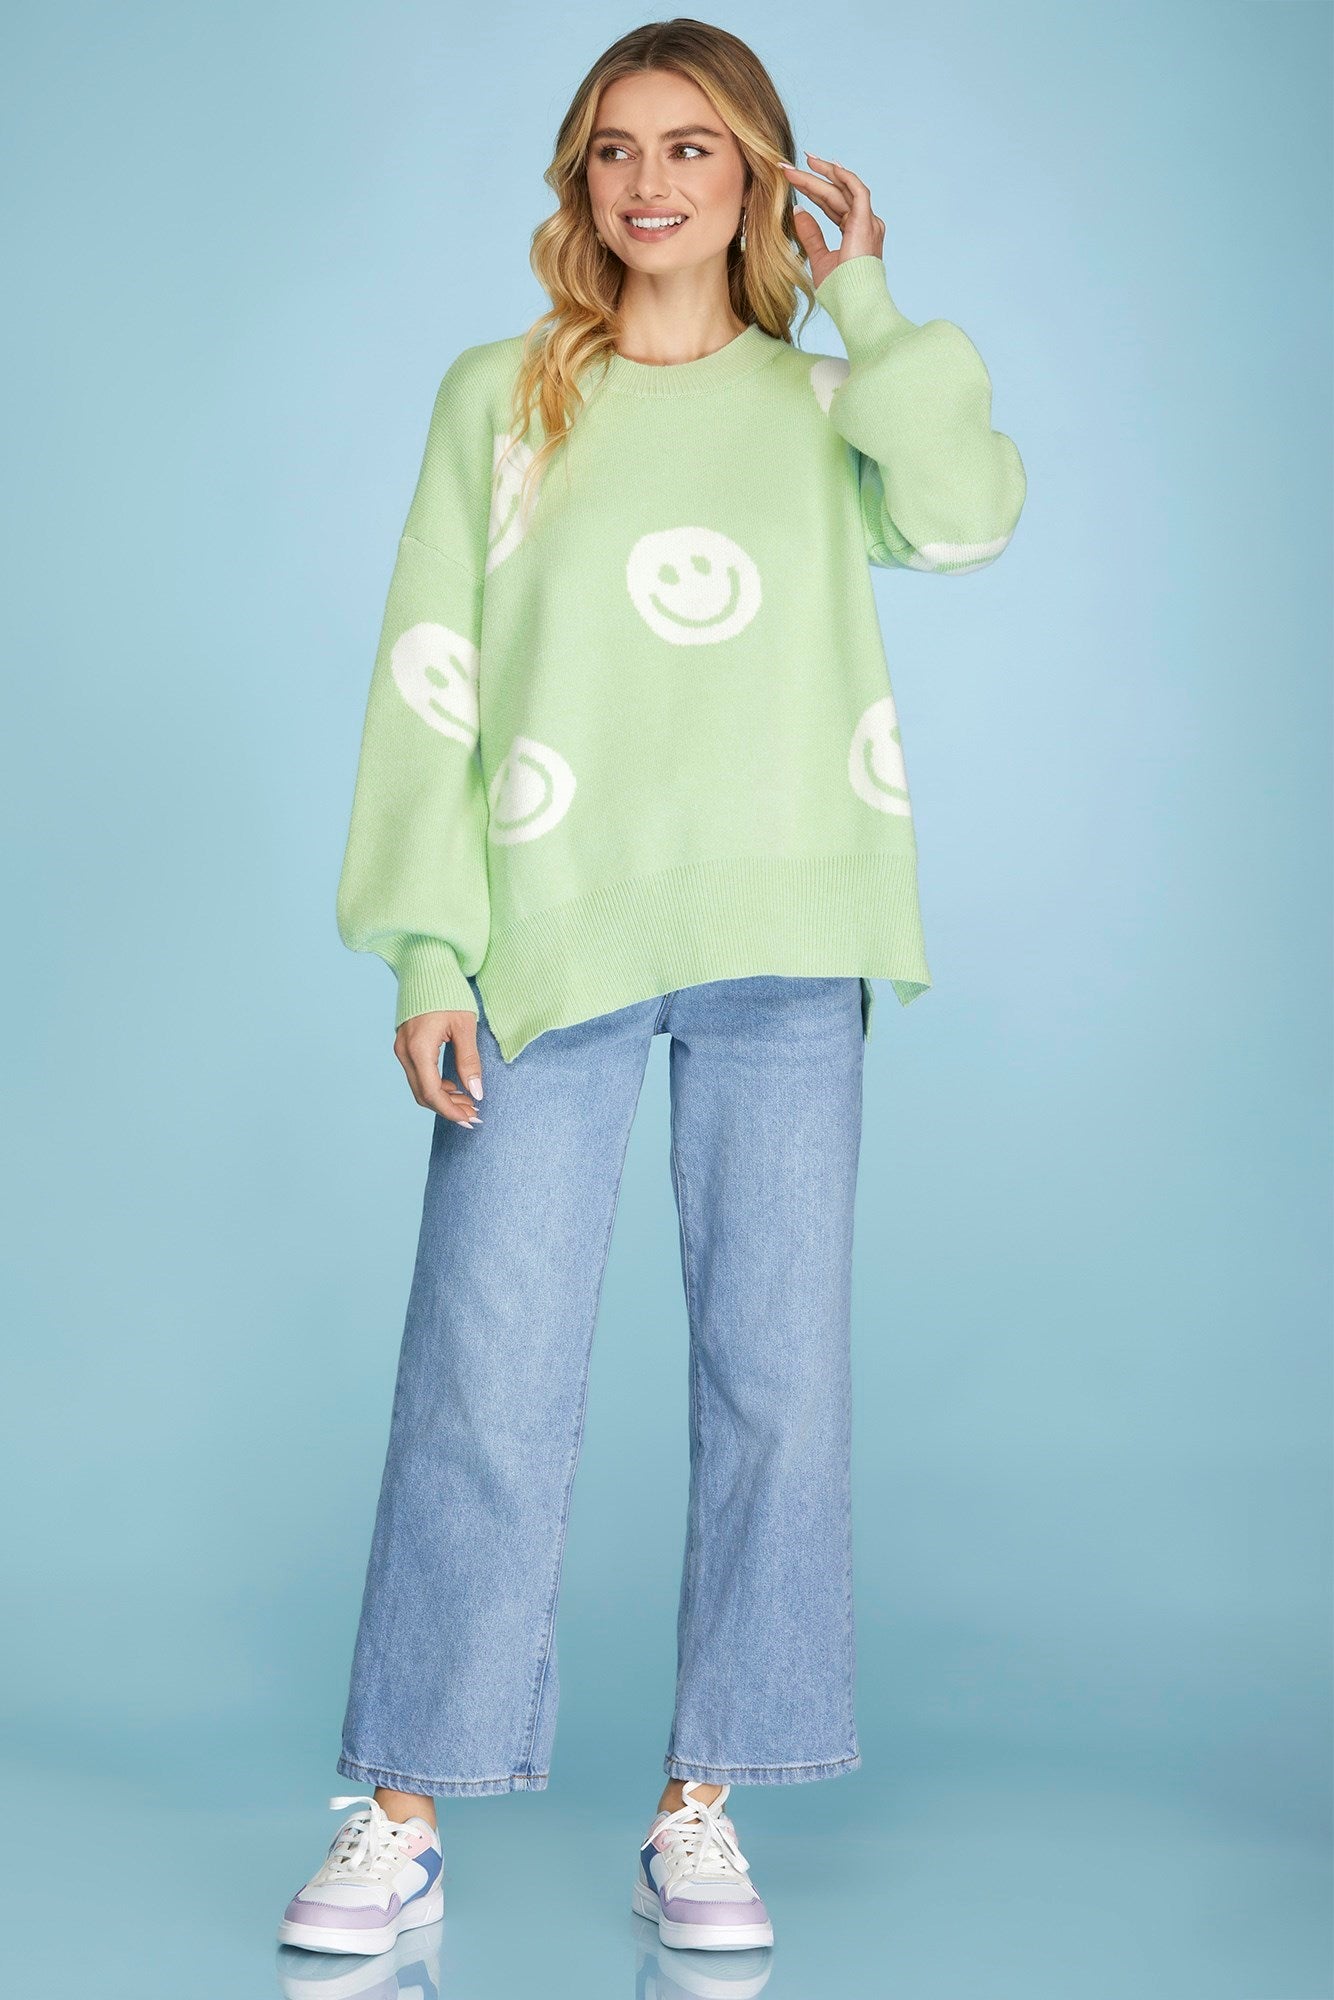 Smiley Face Pattern Sweater